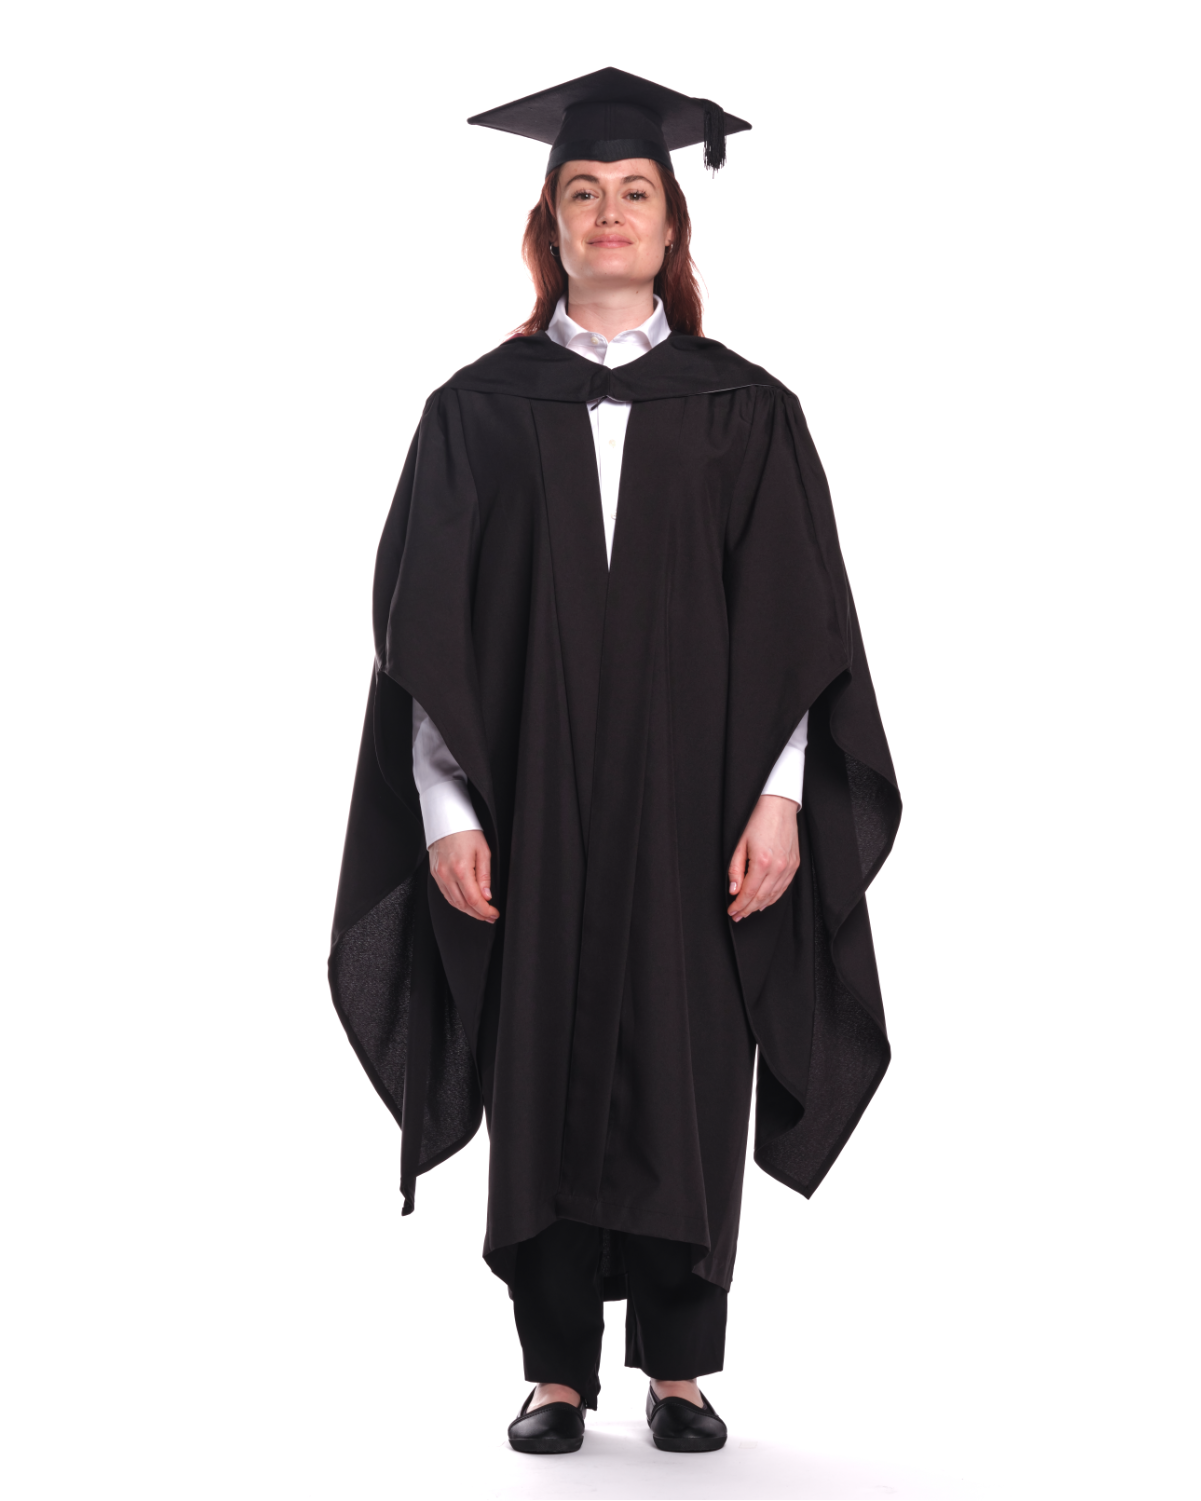 Lancaster University | LLB | Bachelor of Laws Gown, Cap and Hood Set